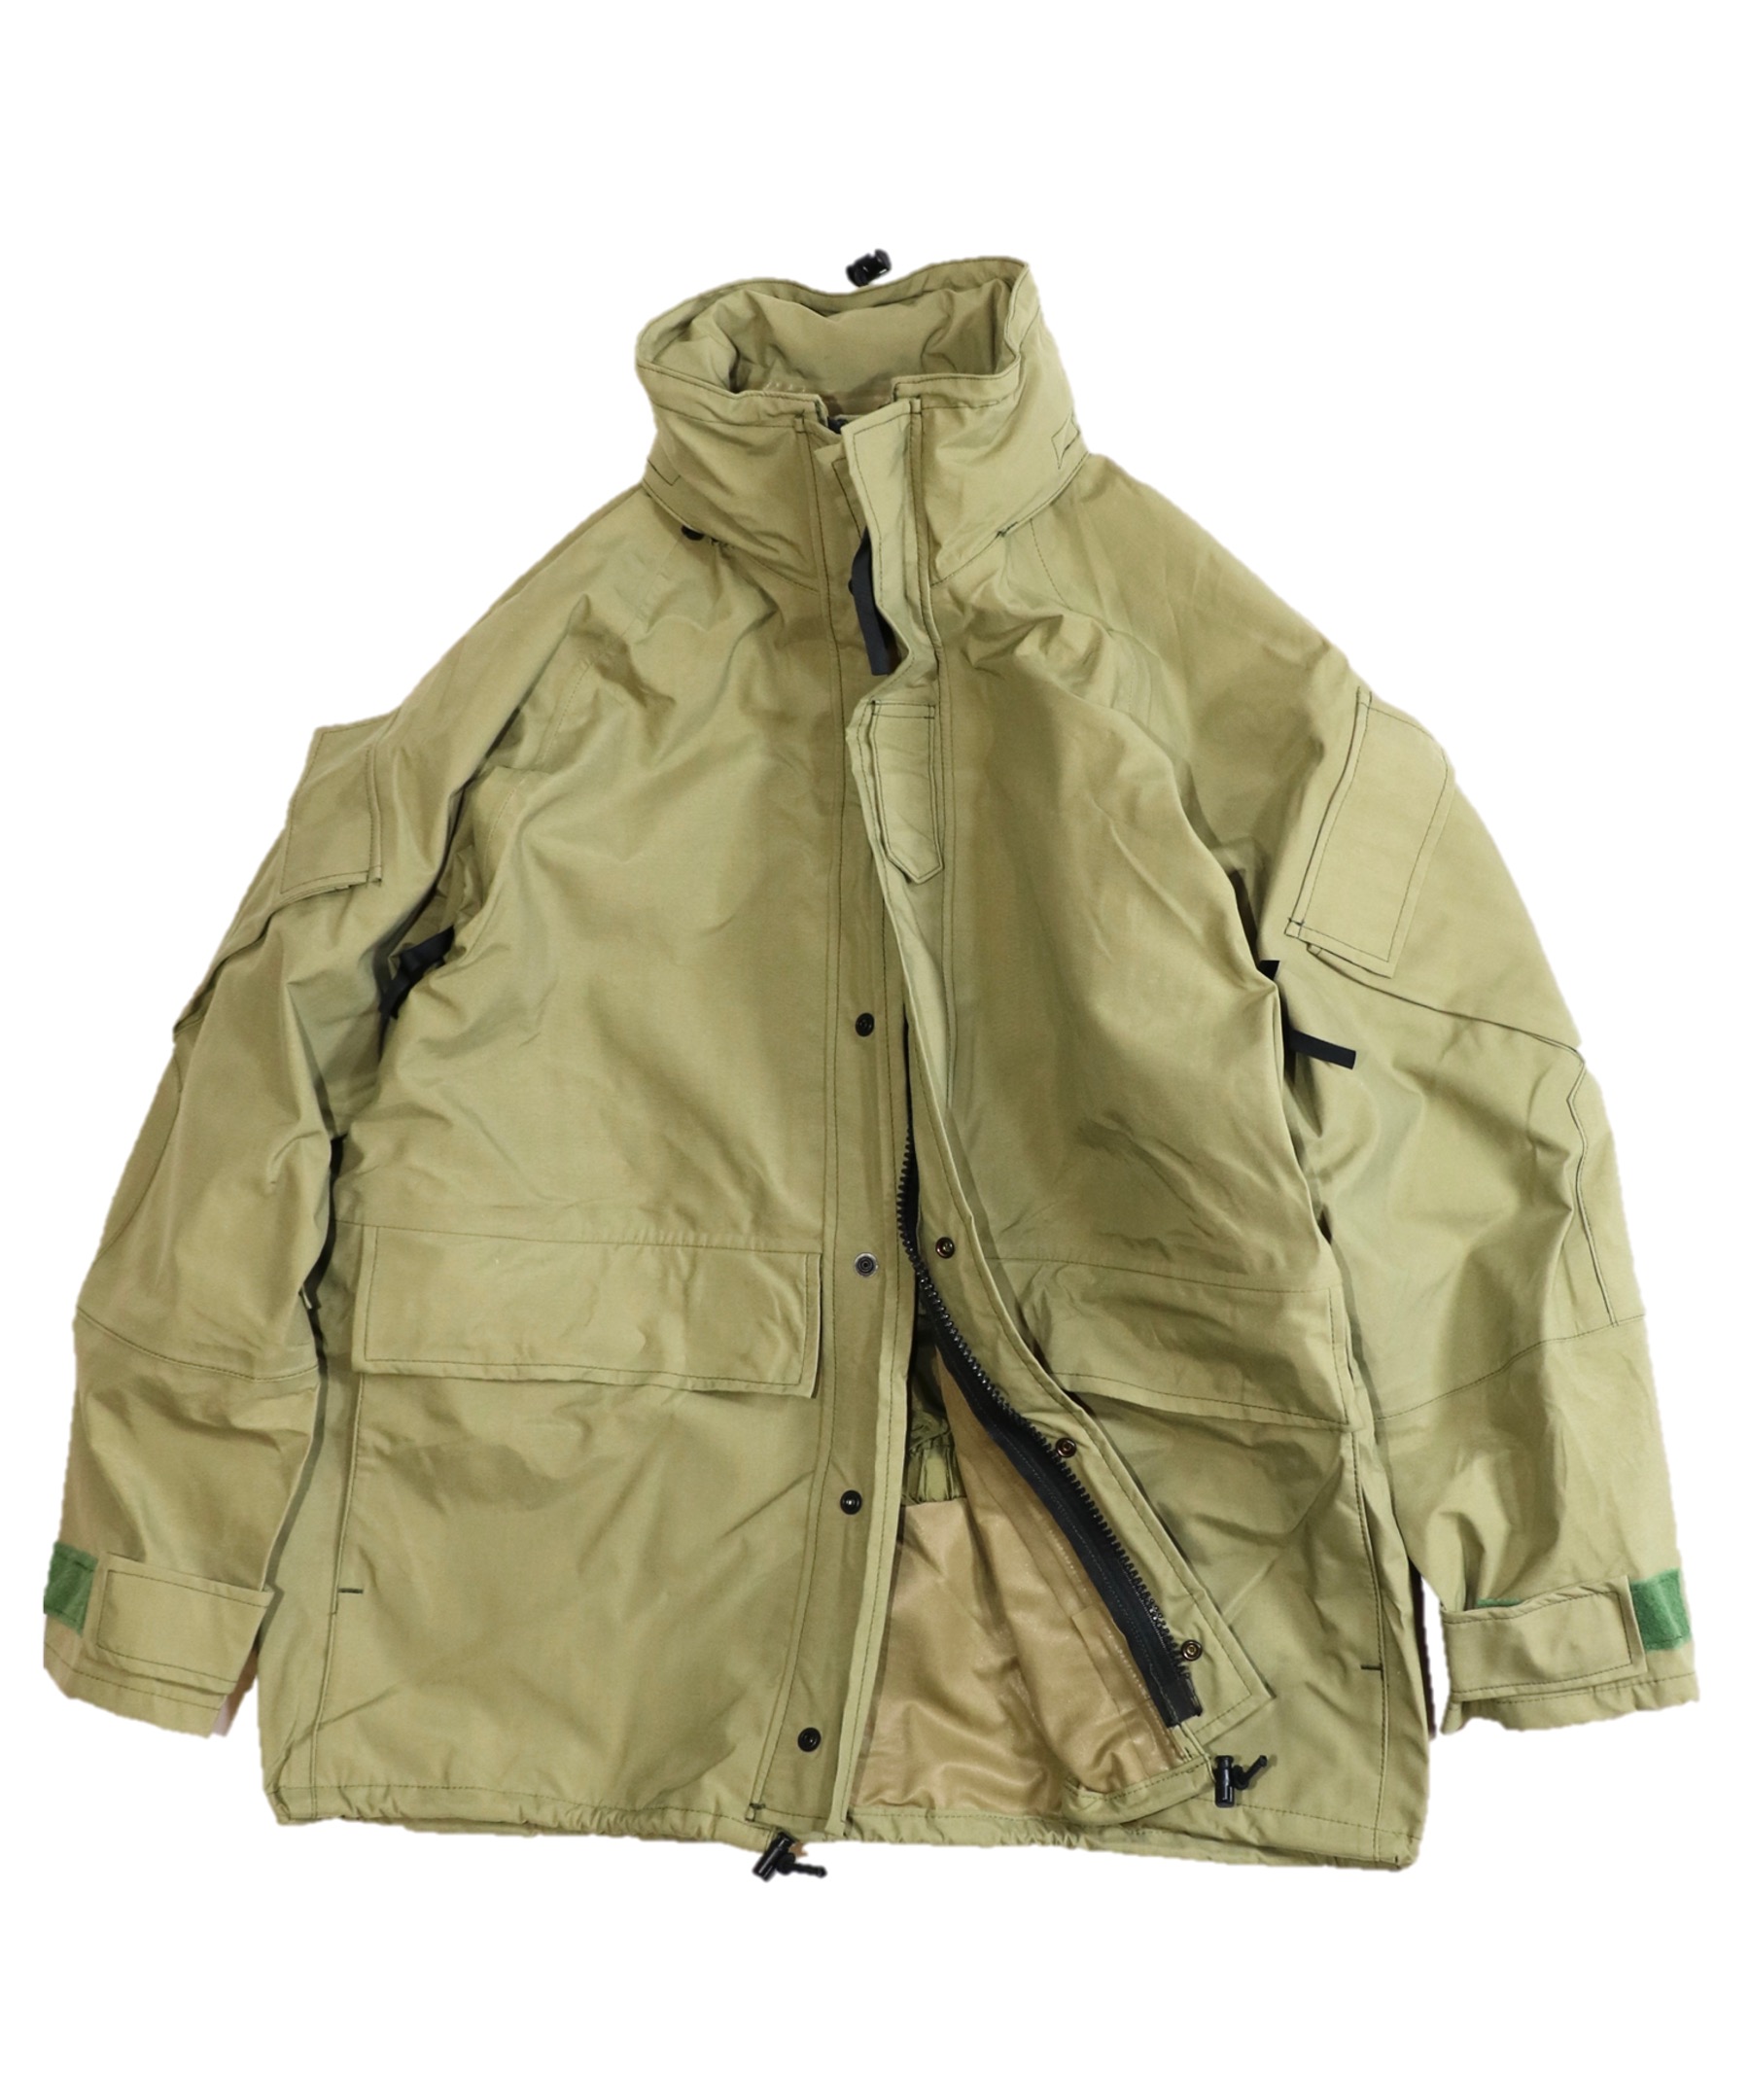 U.S MILITARY / GEN 2 E.C.W.C.S LEVEL5 PARKA. – C.E.L.STORE NOTE